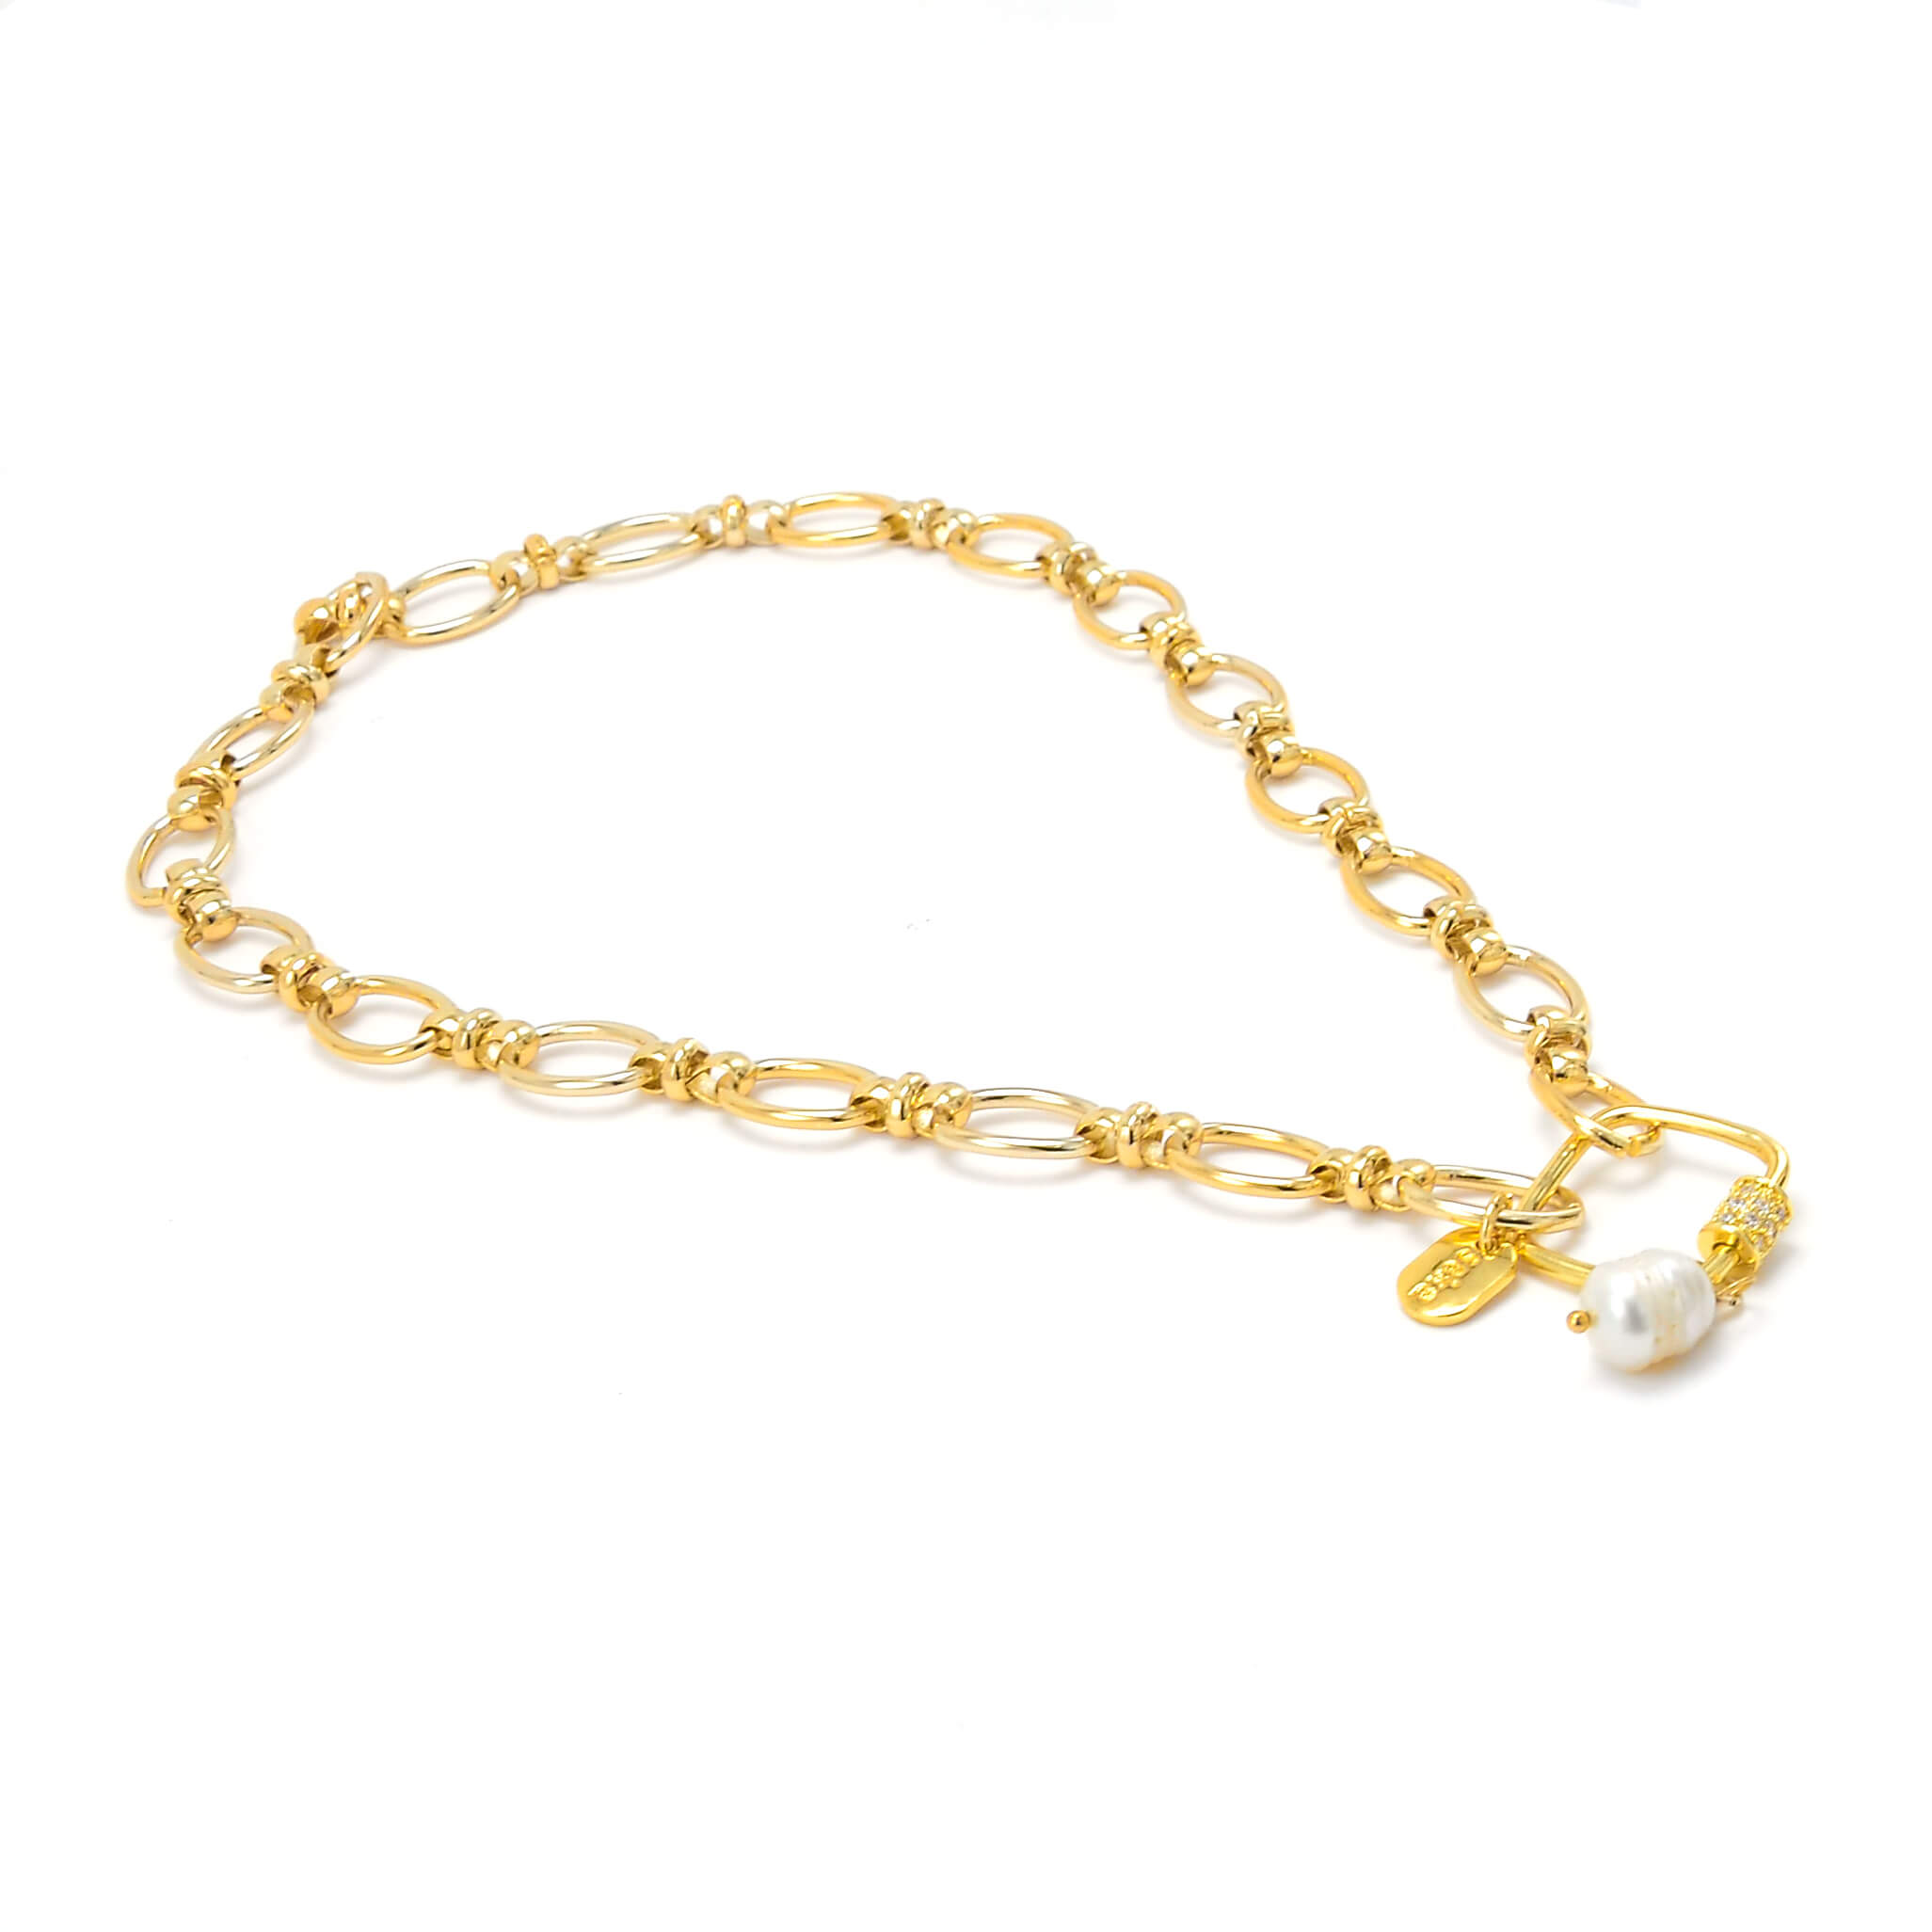 Square Carabiner Gold Chain Necklace